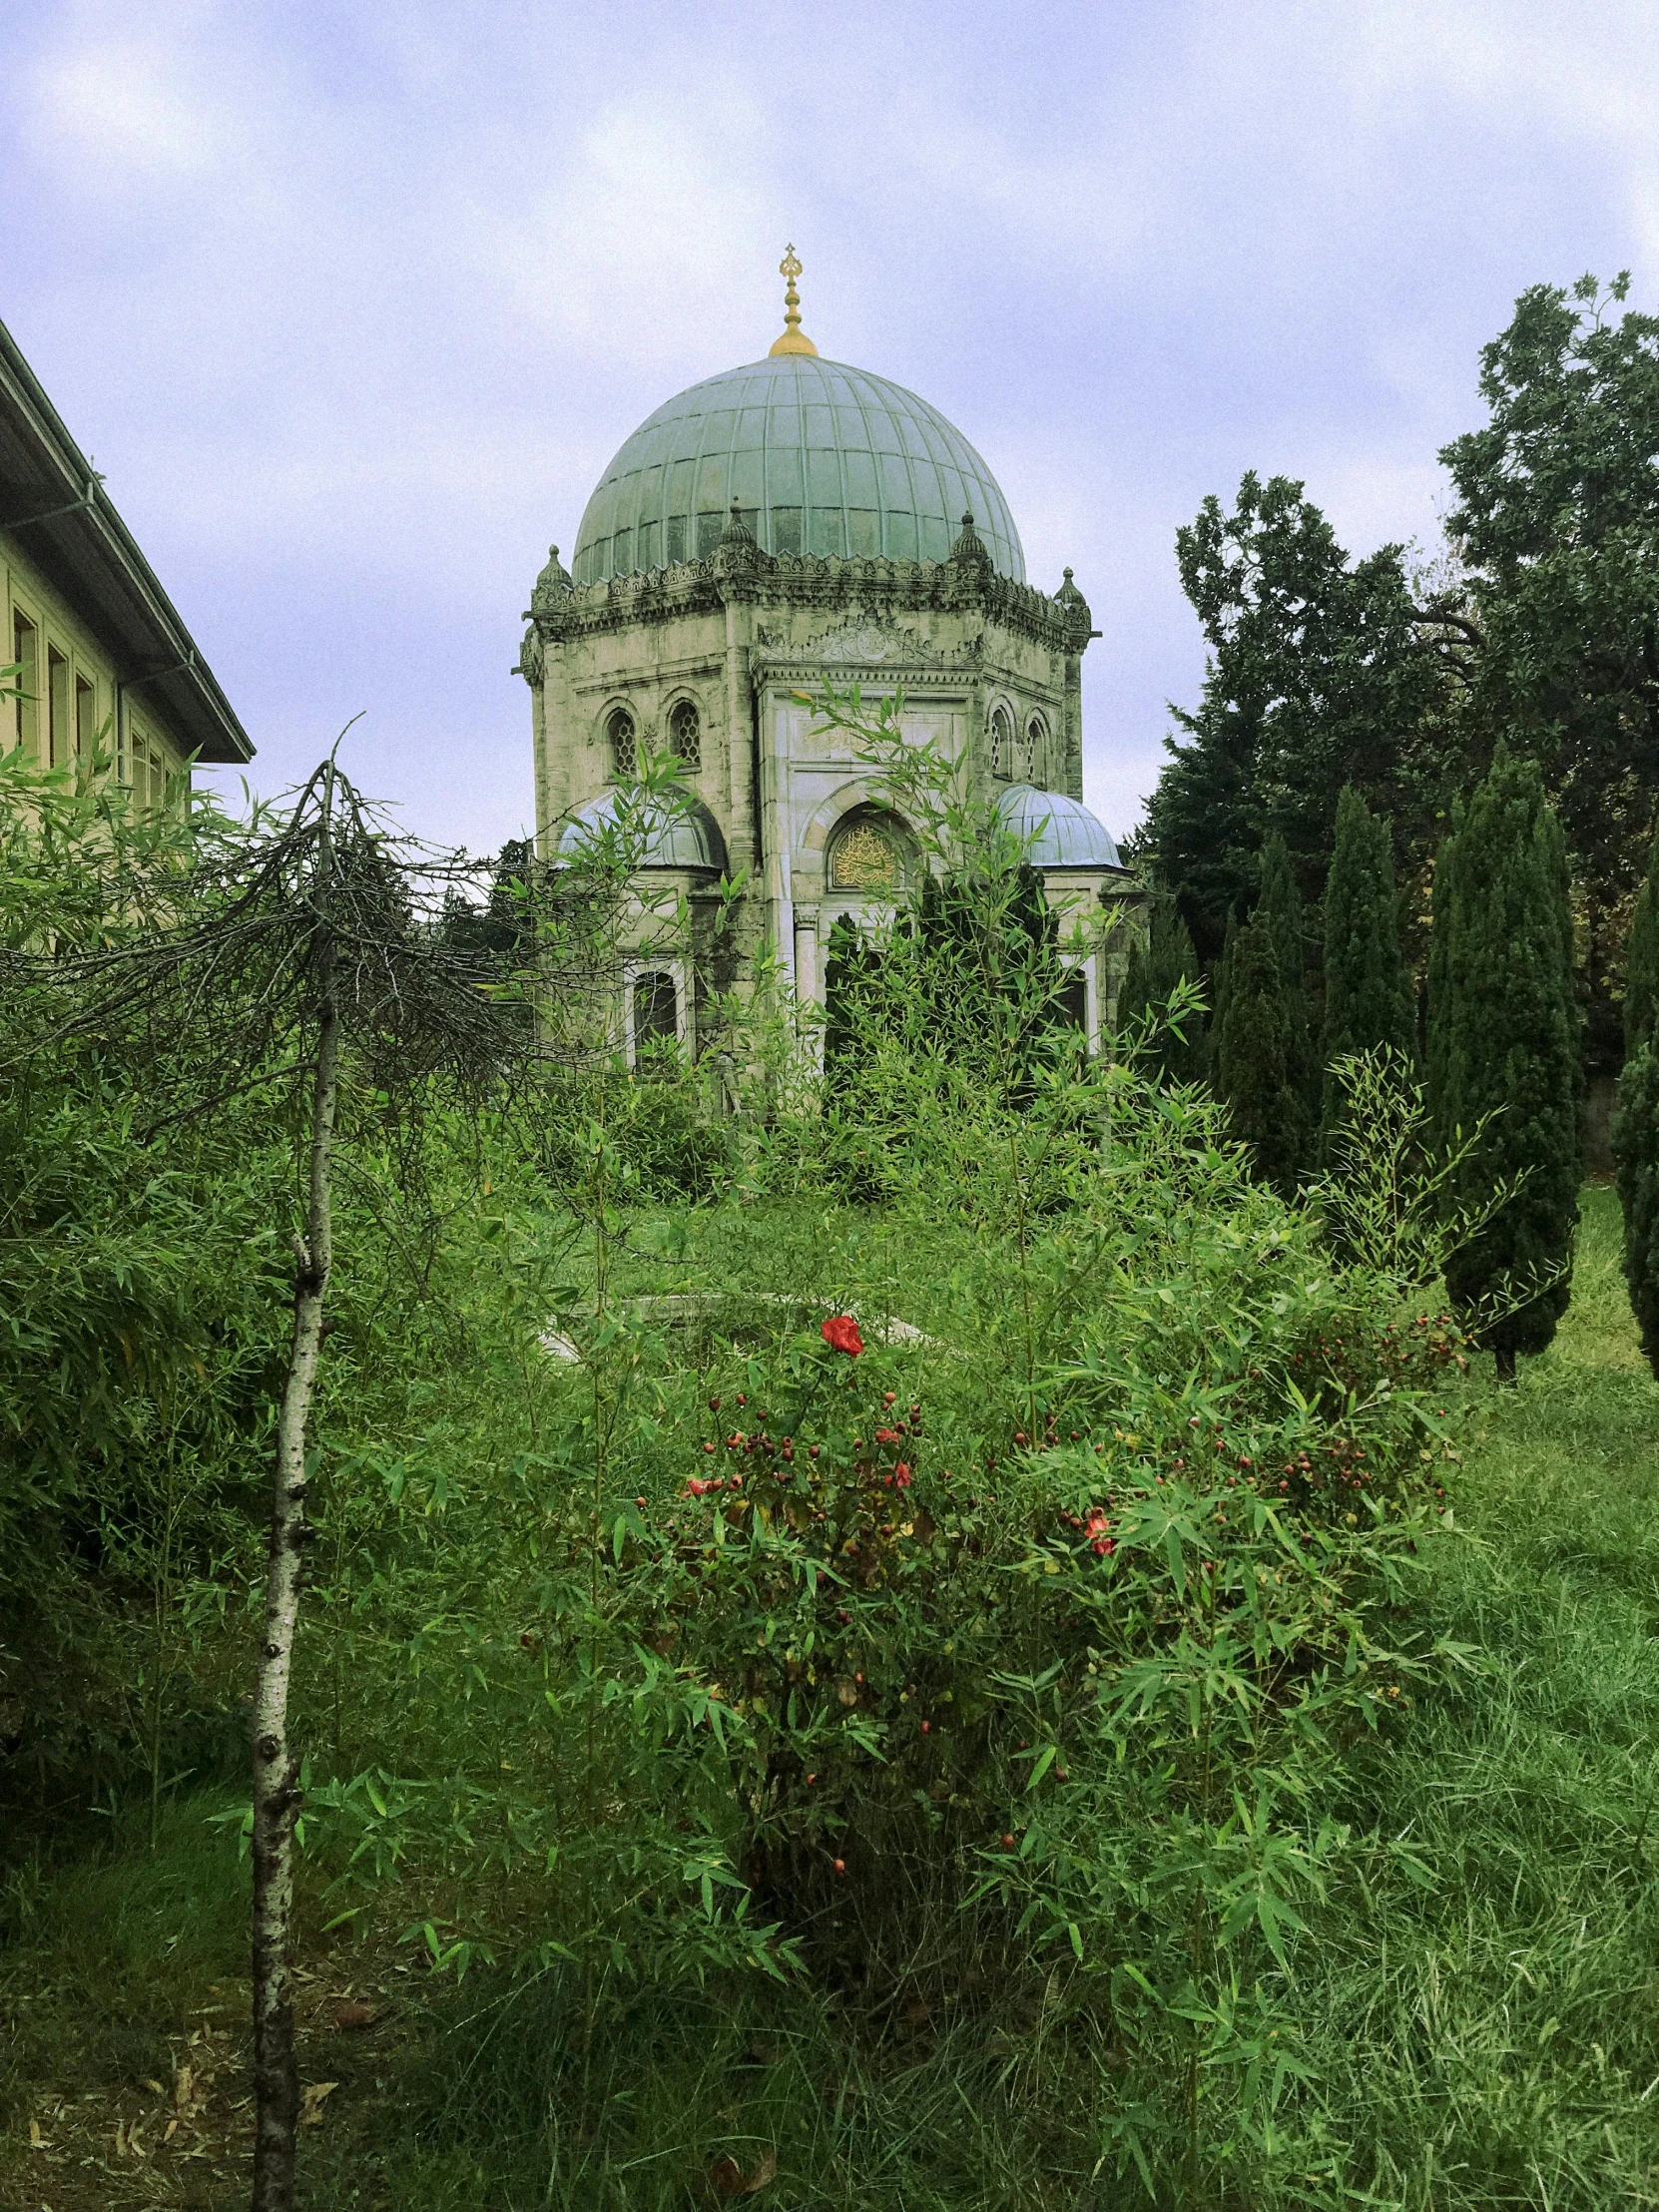 an old, run down church among some trees and flowers